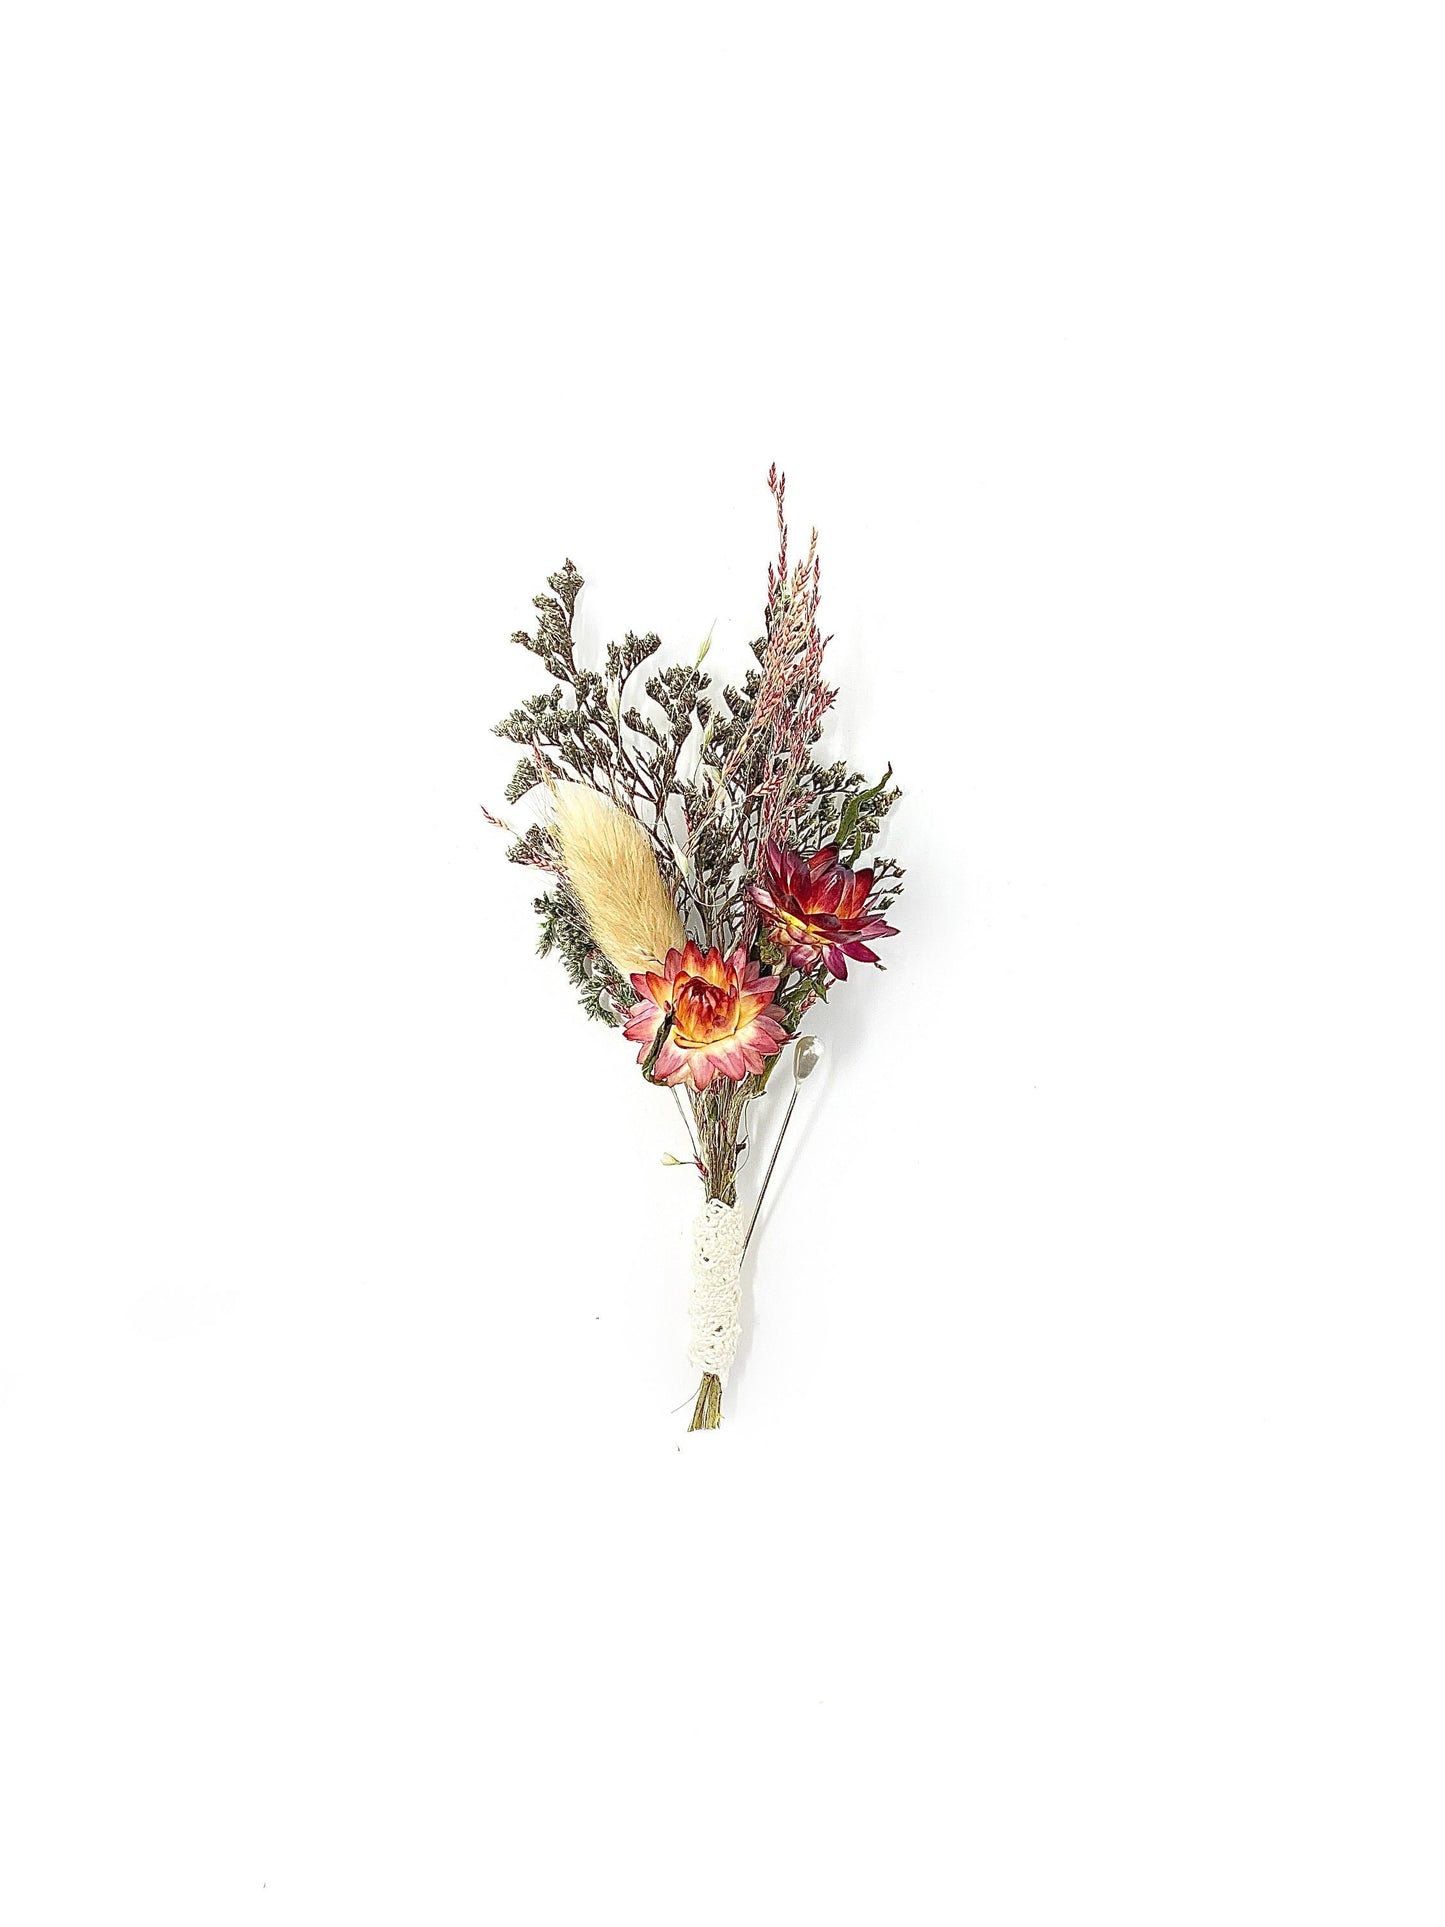 Wedding Boutonniere, Preserved Floral, Dried Flowers, Bridal Accessories, Decor, Strawflowers, Bunny Tails